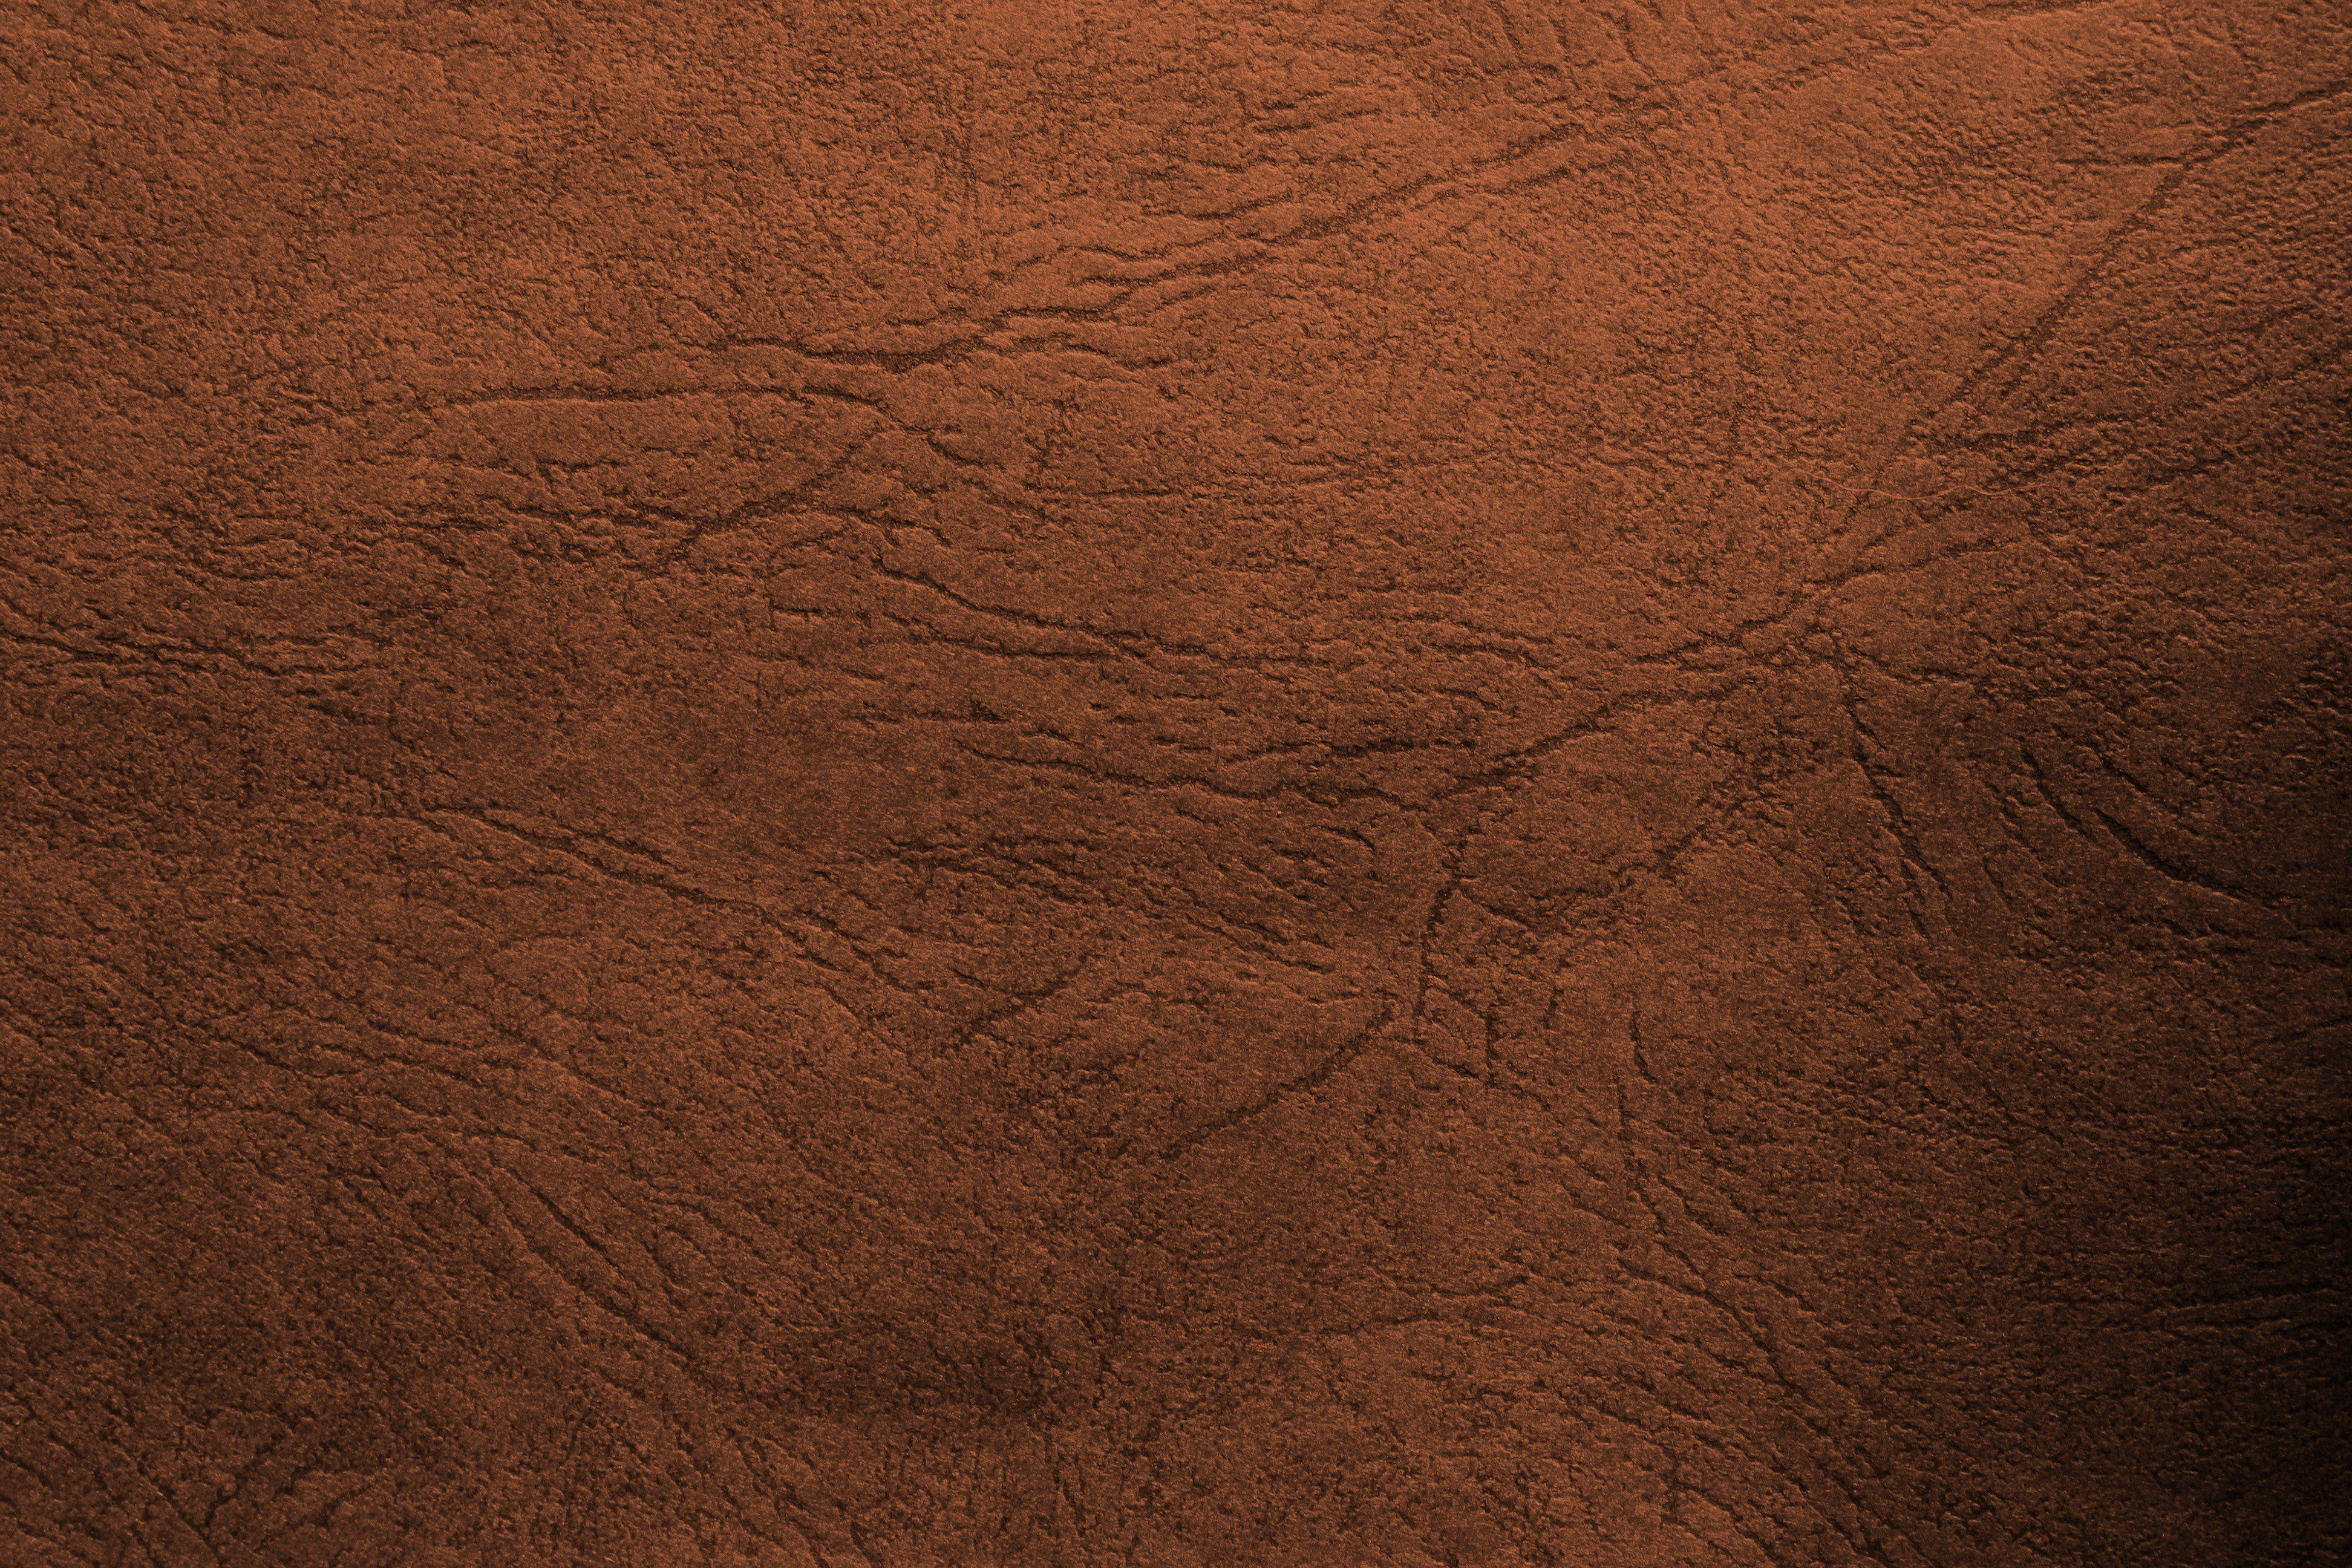 Leather Texture Wallpapers - Top Free Leather Texture Backgrounds ...